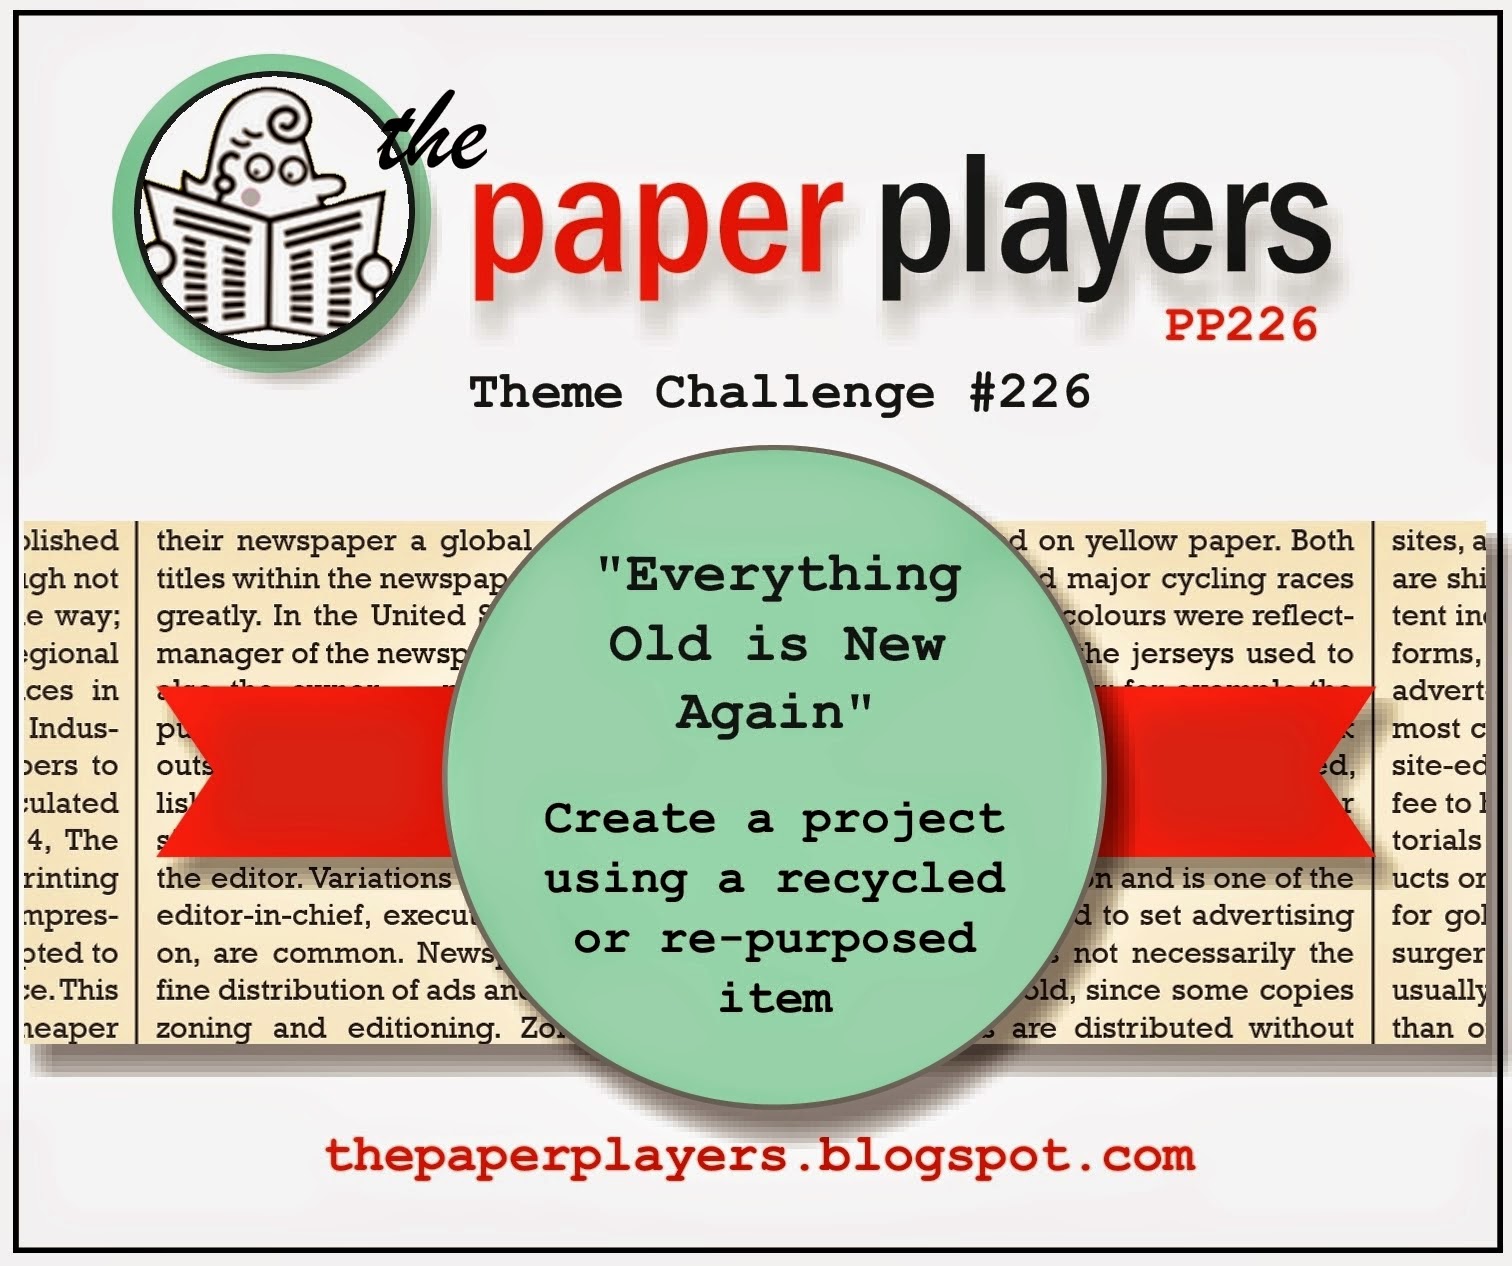 http://thepaperplayers.blogspot.ca/2015/01/paper-players-226-anne-maries-theme.html